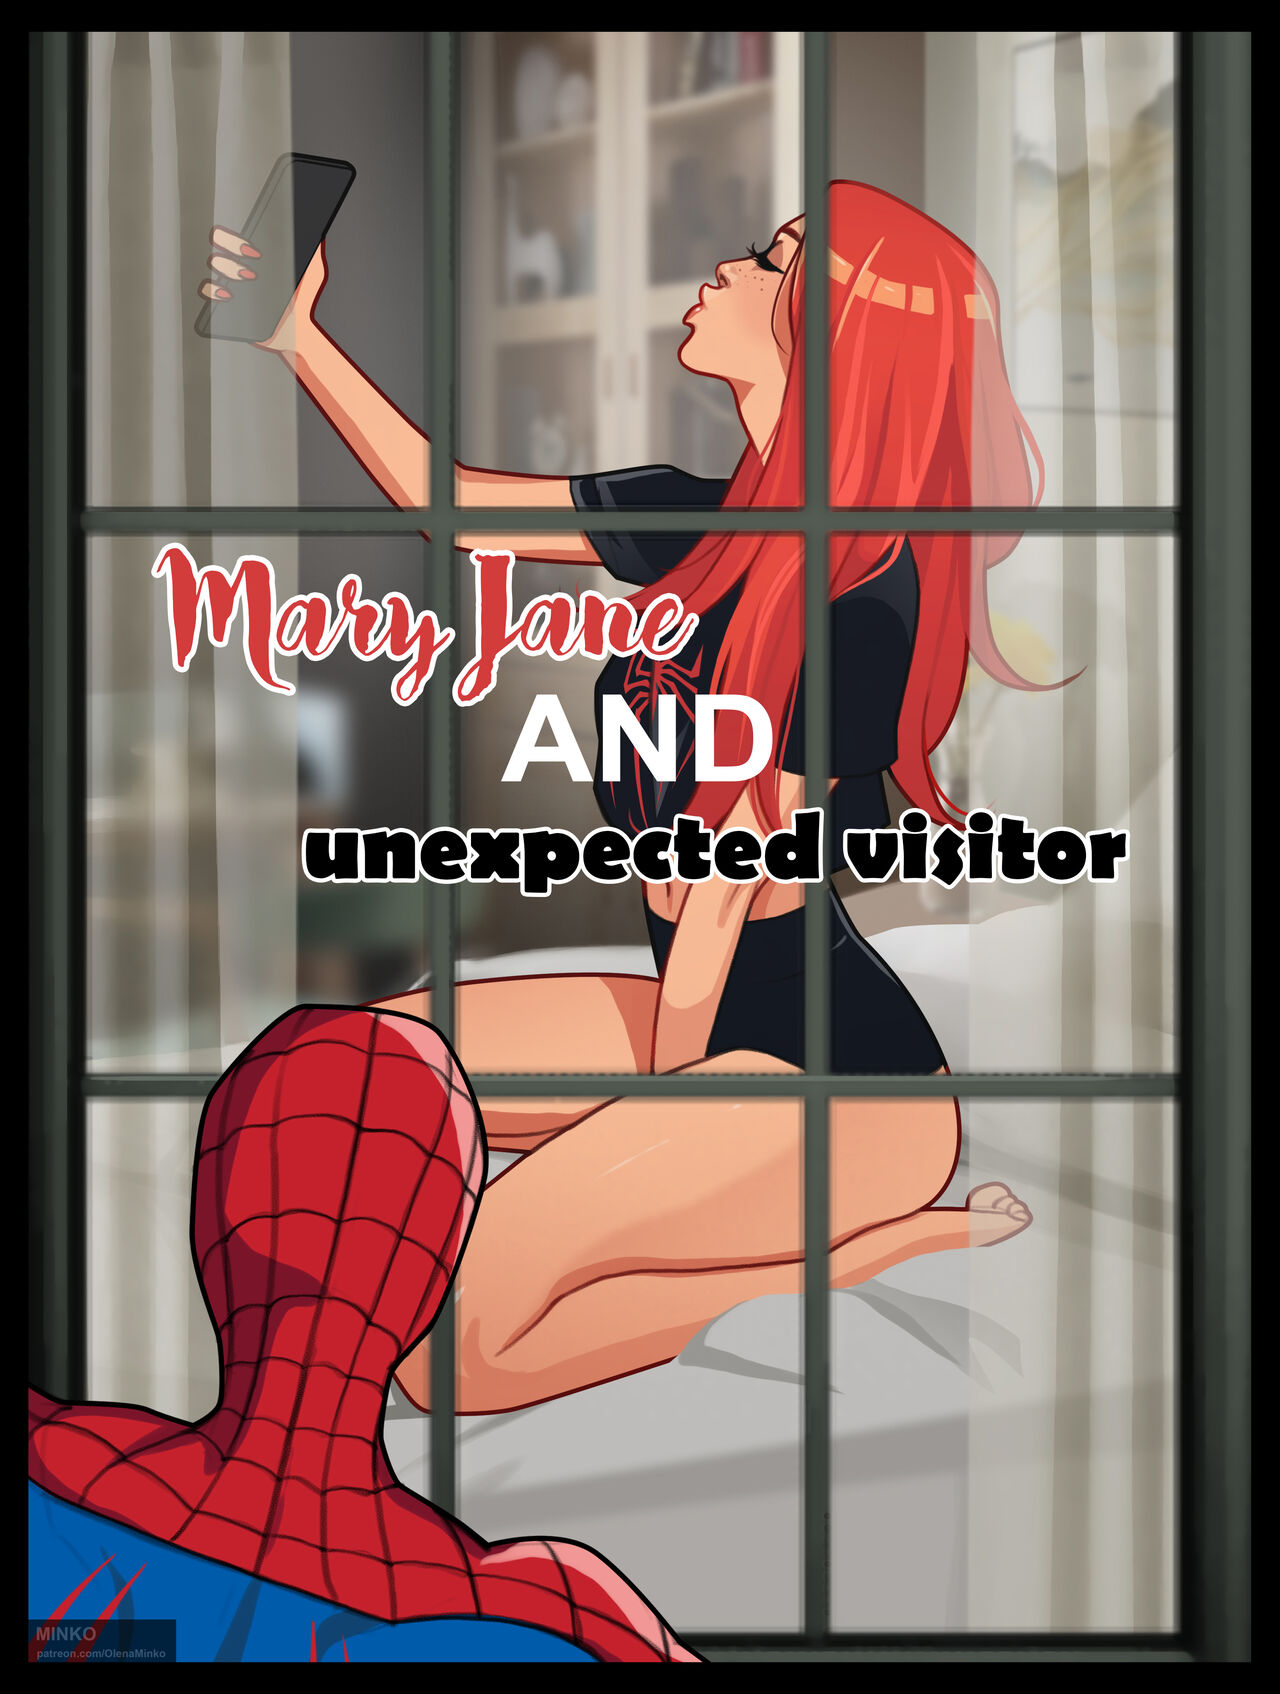 ᐅ MARY JANE and Unexpected Visitor